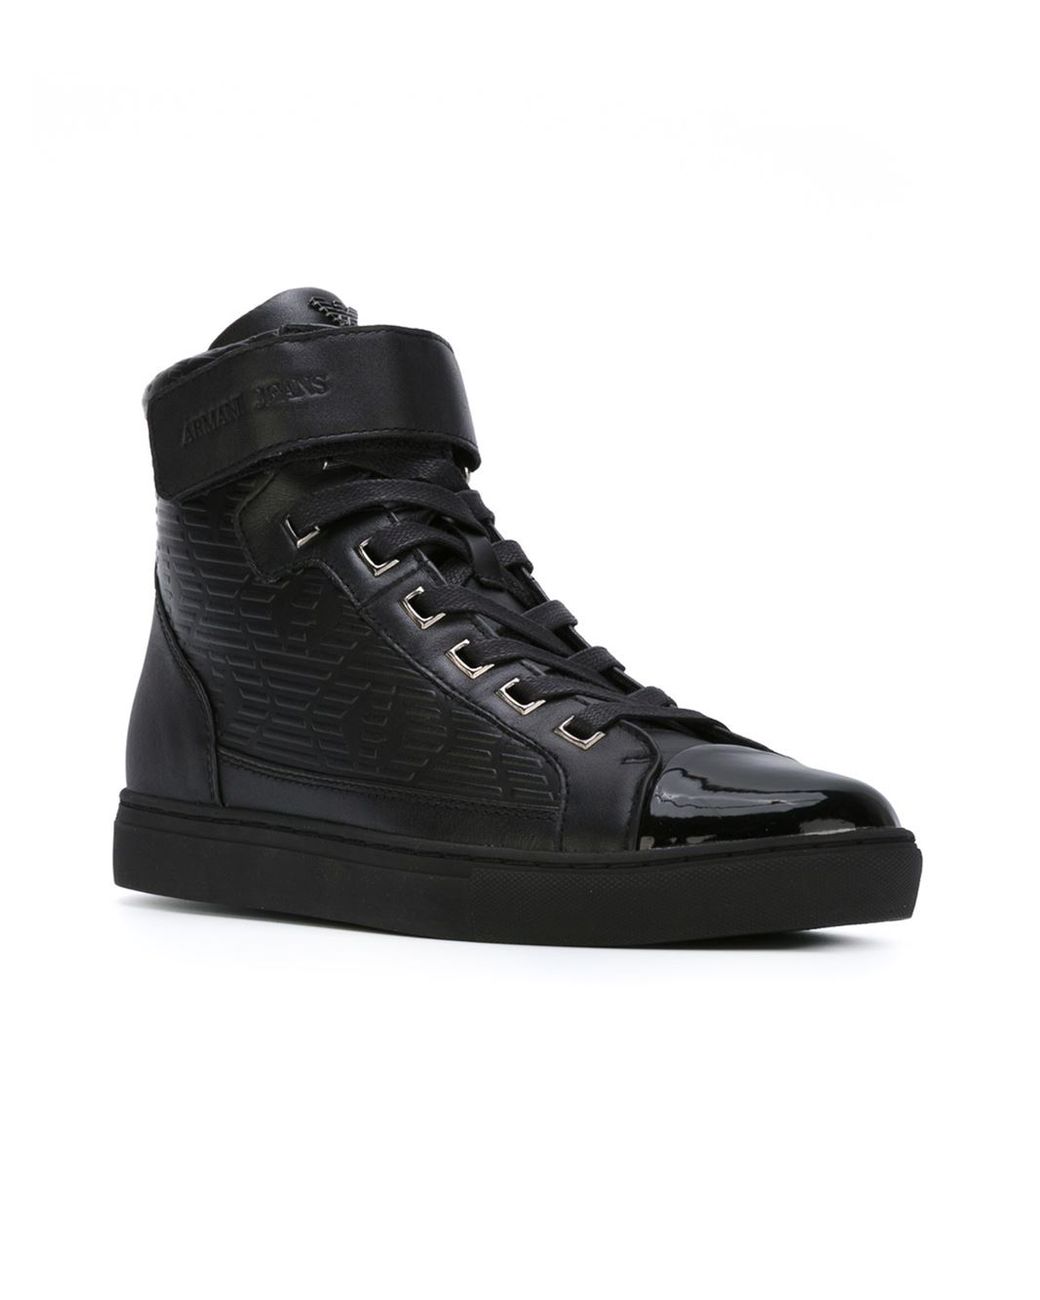 Armani Leather High-Top Sneakers in Black for Men Lyst